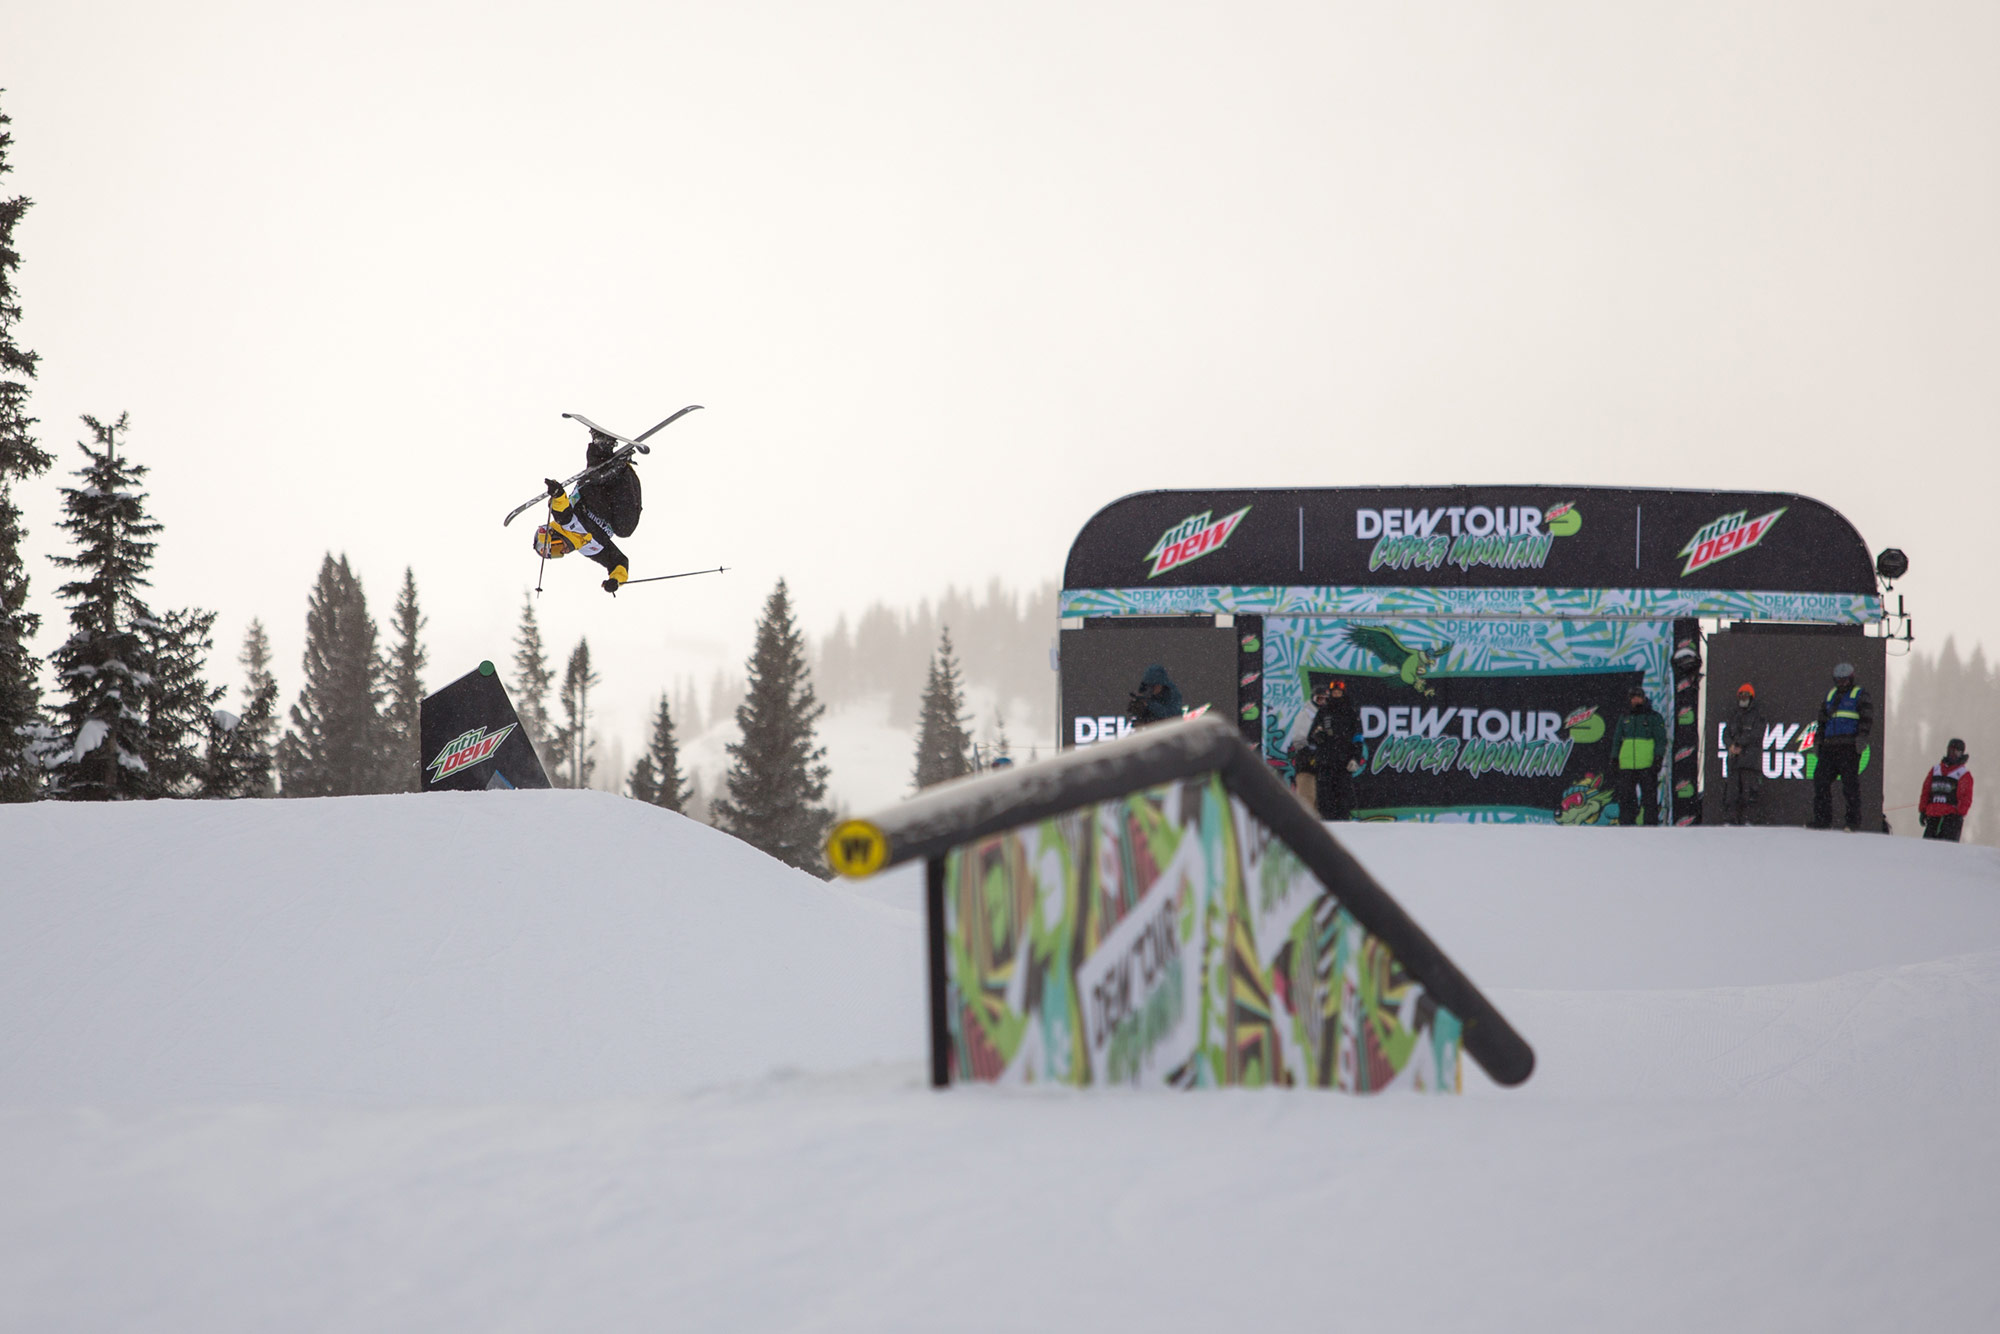 Fabian Bösch competes in the men's slopestyle final at the 2021 Winter Dew Tour in Copper Mountain, Colorado